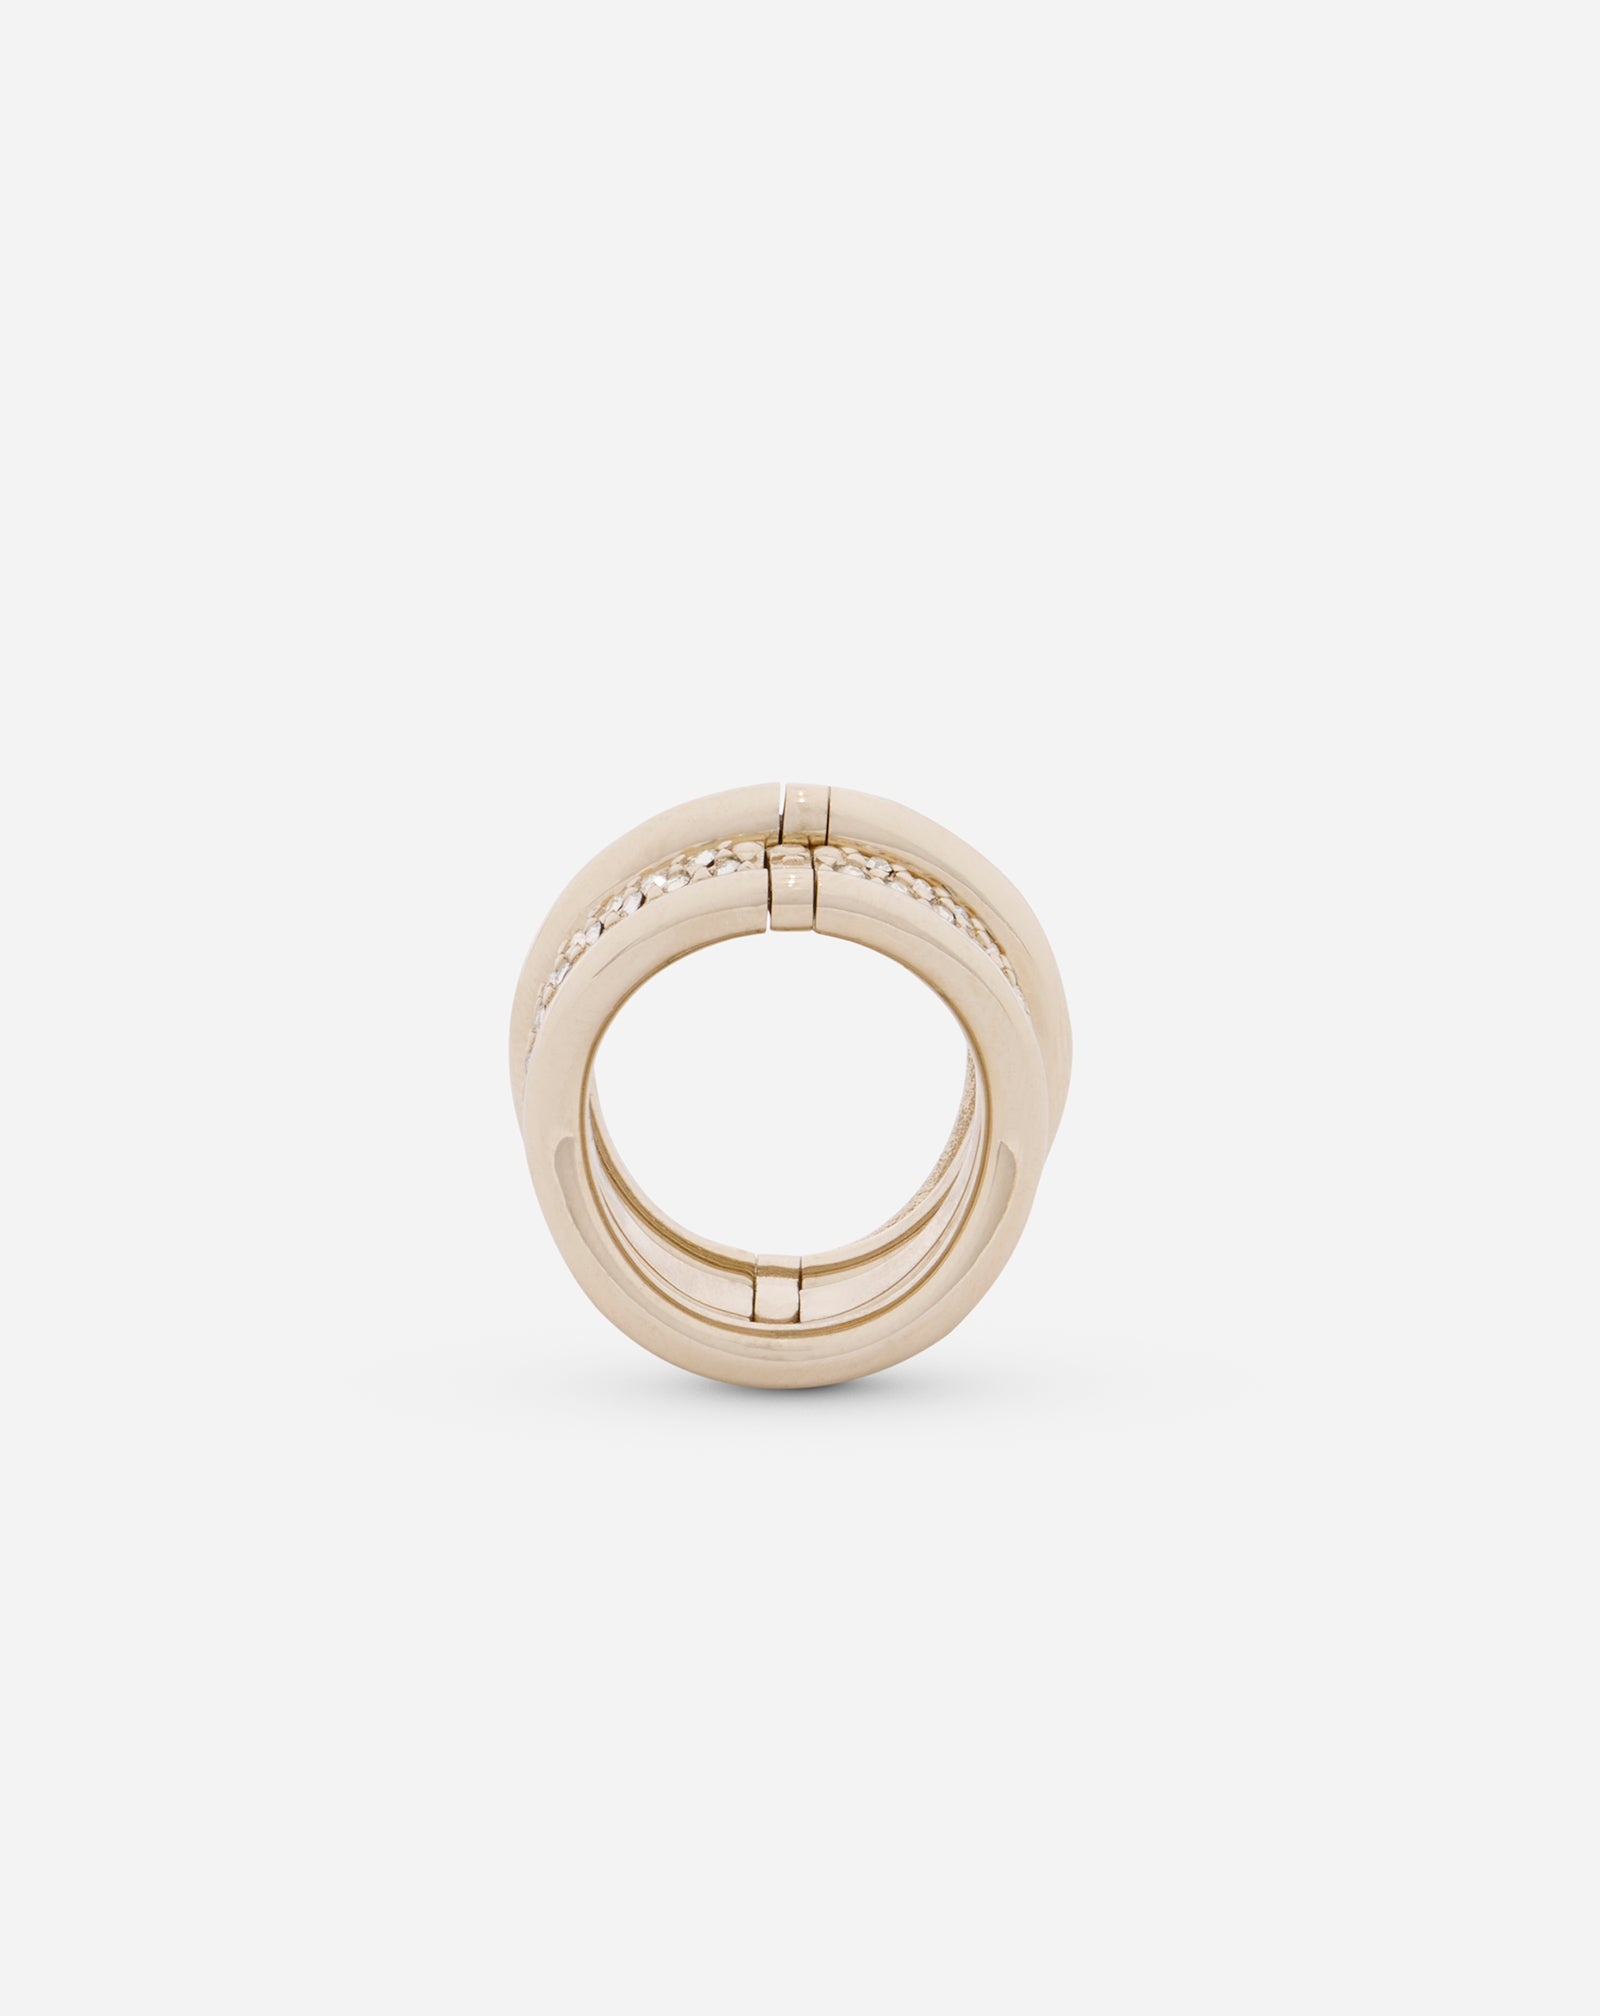 PARTITION BY LANVIN RING - 5